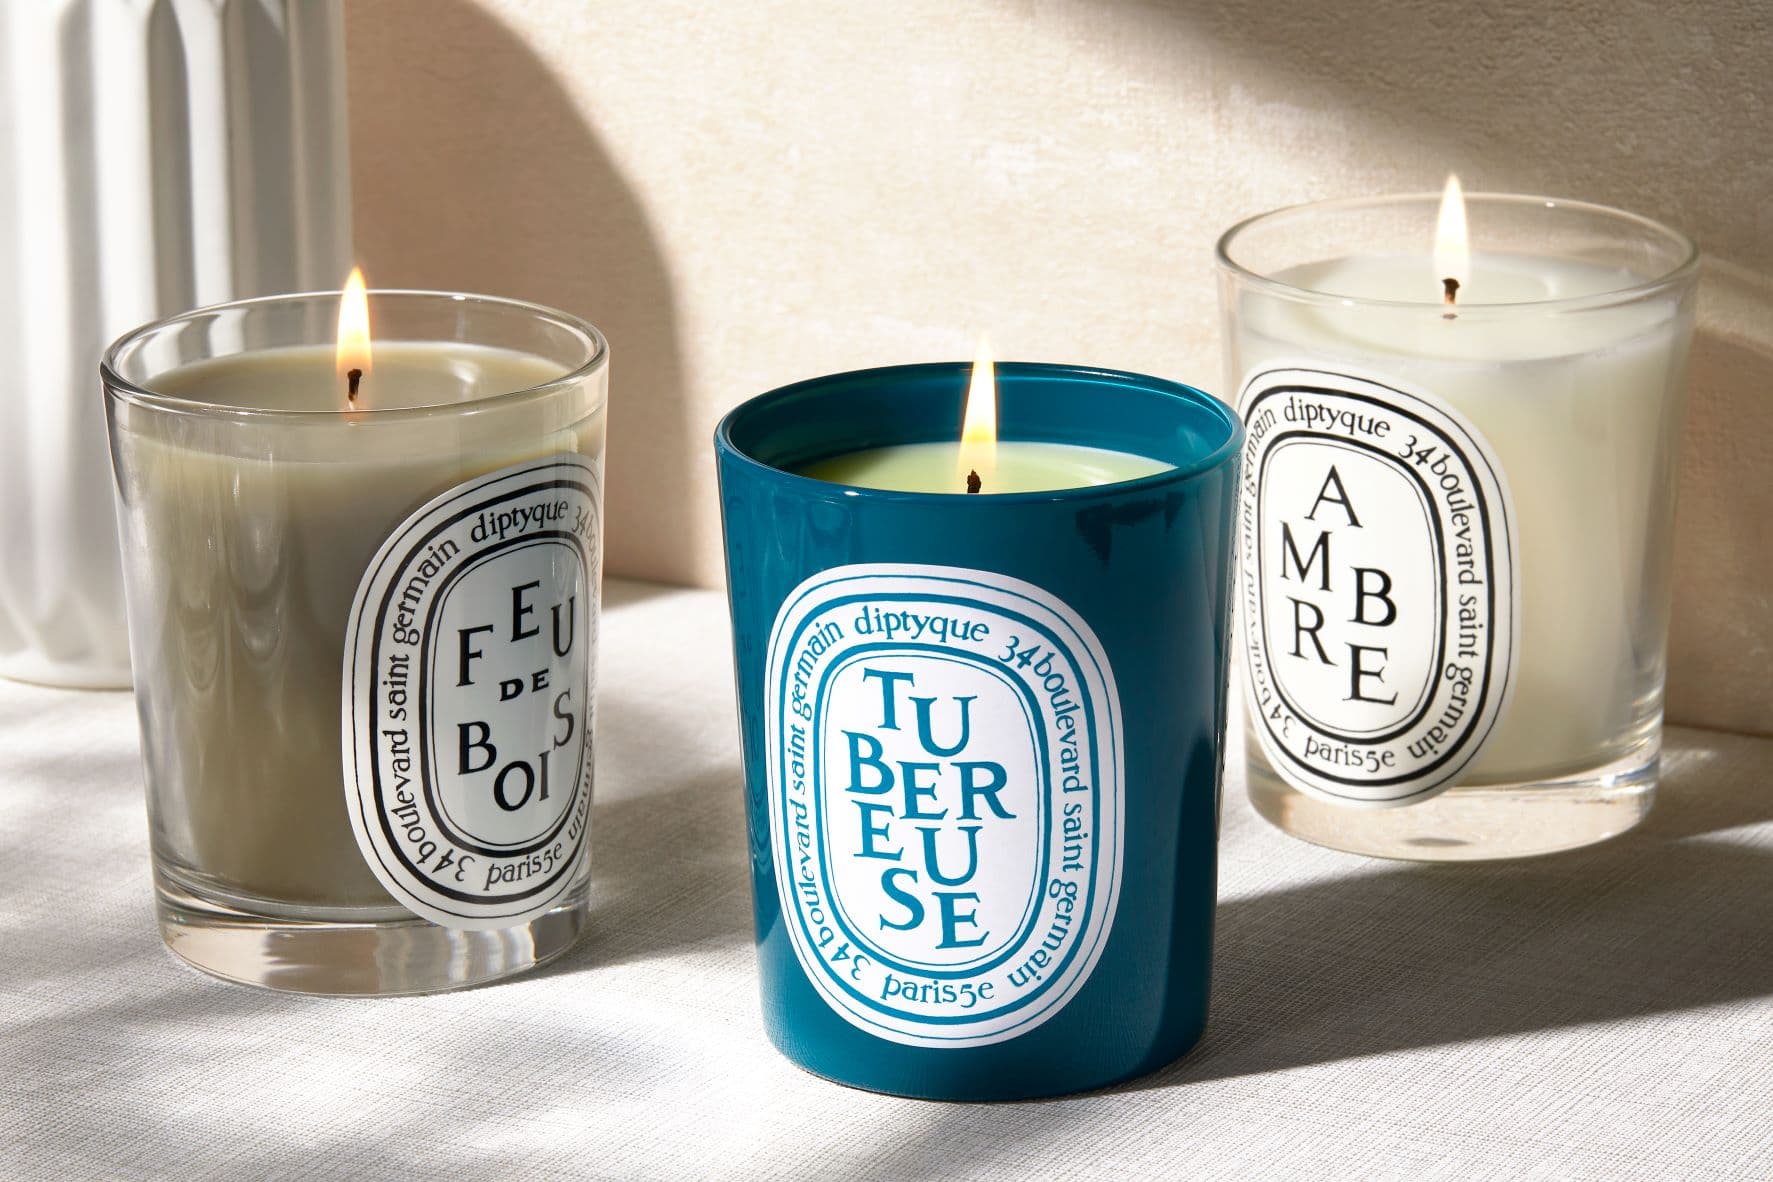 What The Best Diptyque Candle Actually Smells Like